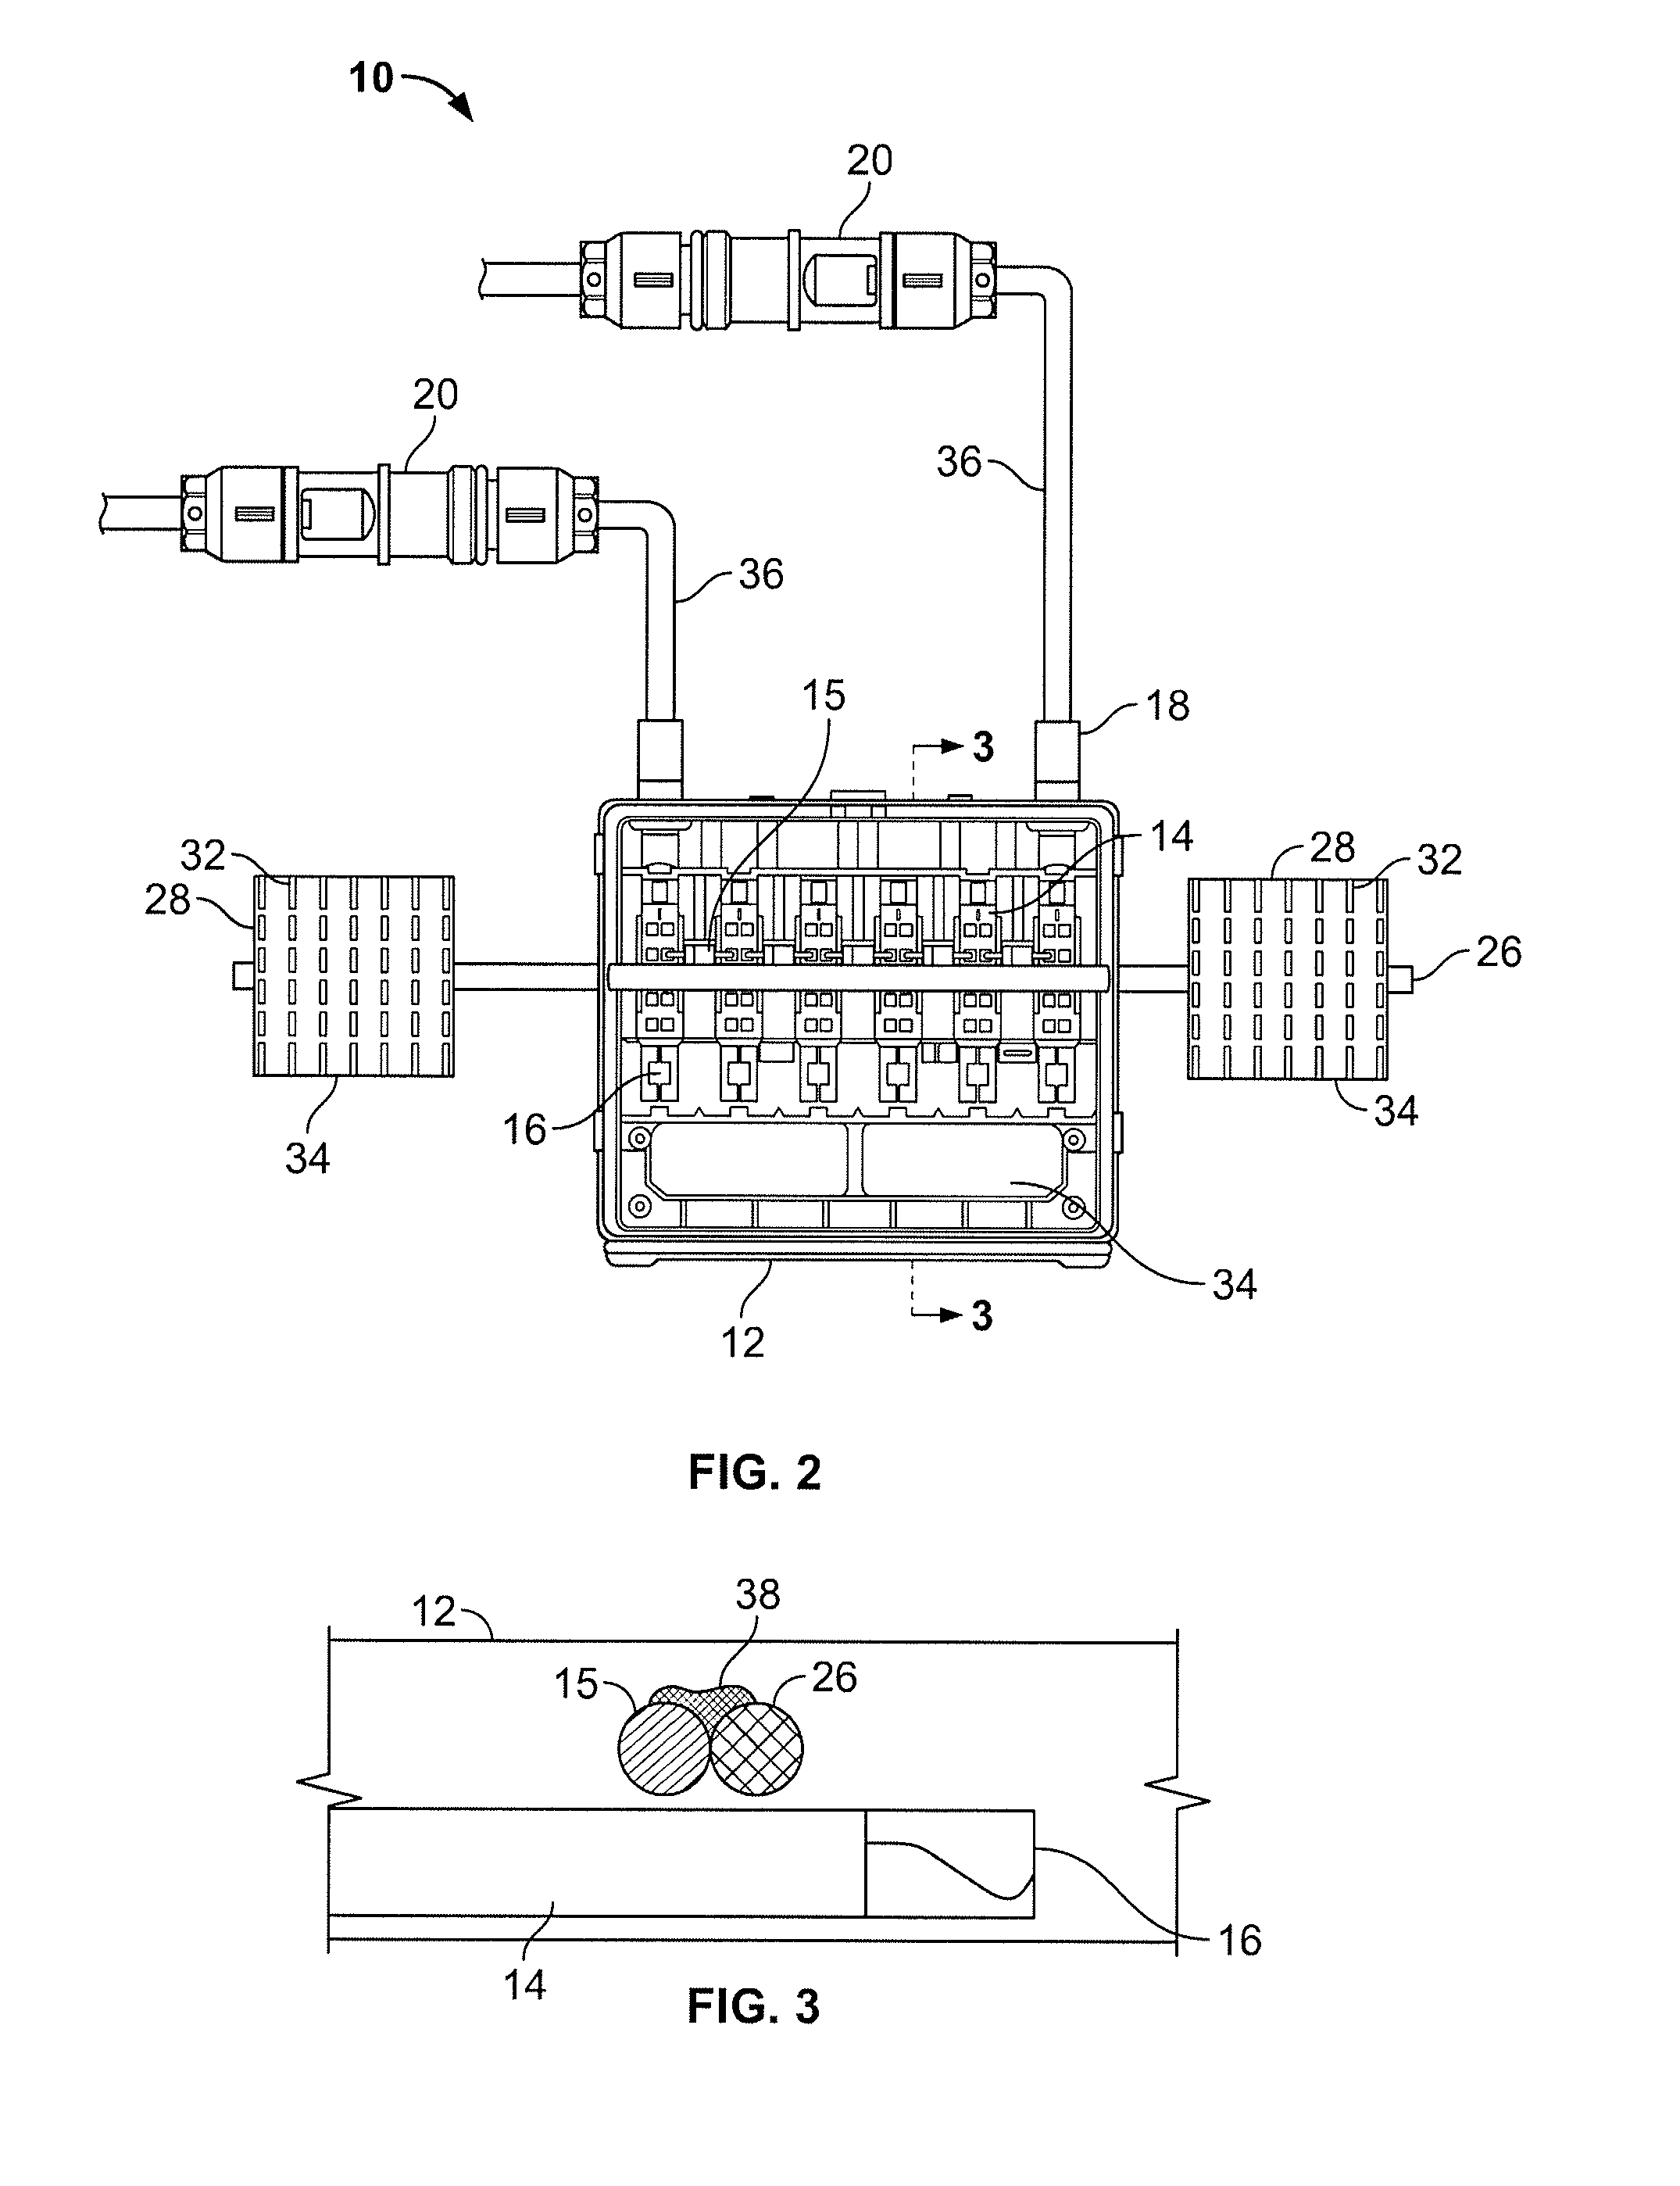 Heat dissipation system for solarlok photovoltaic interconnection system